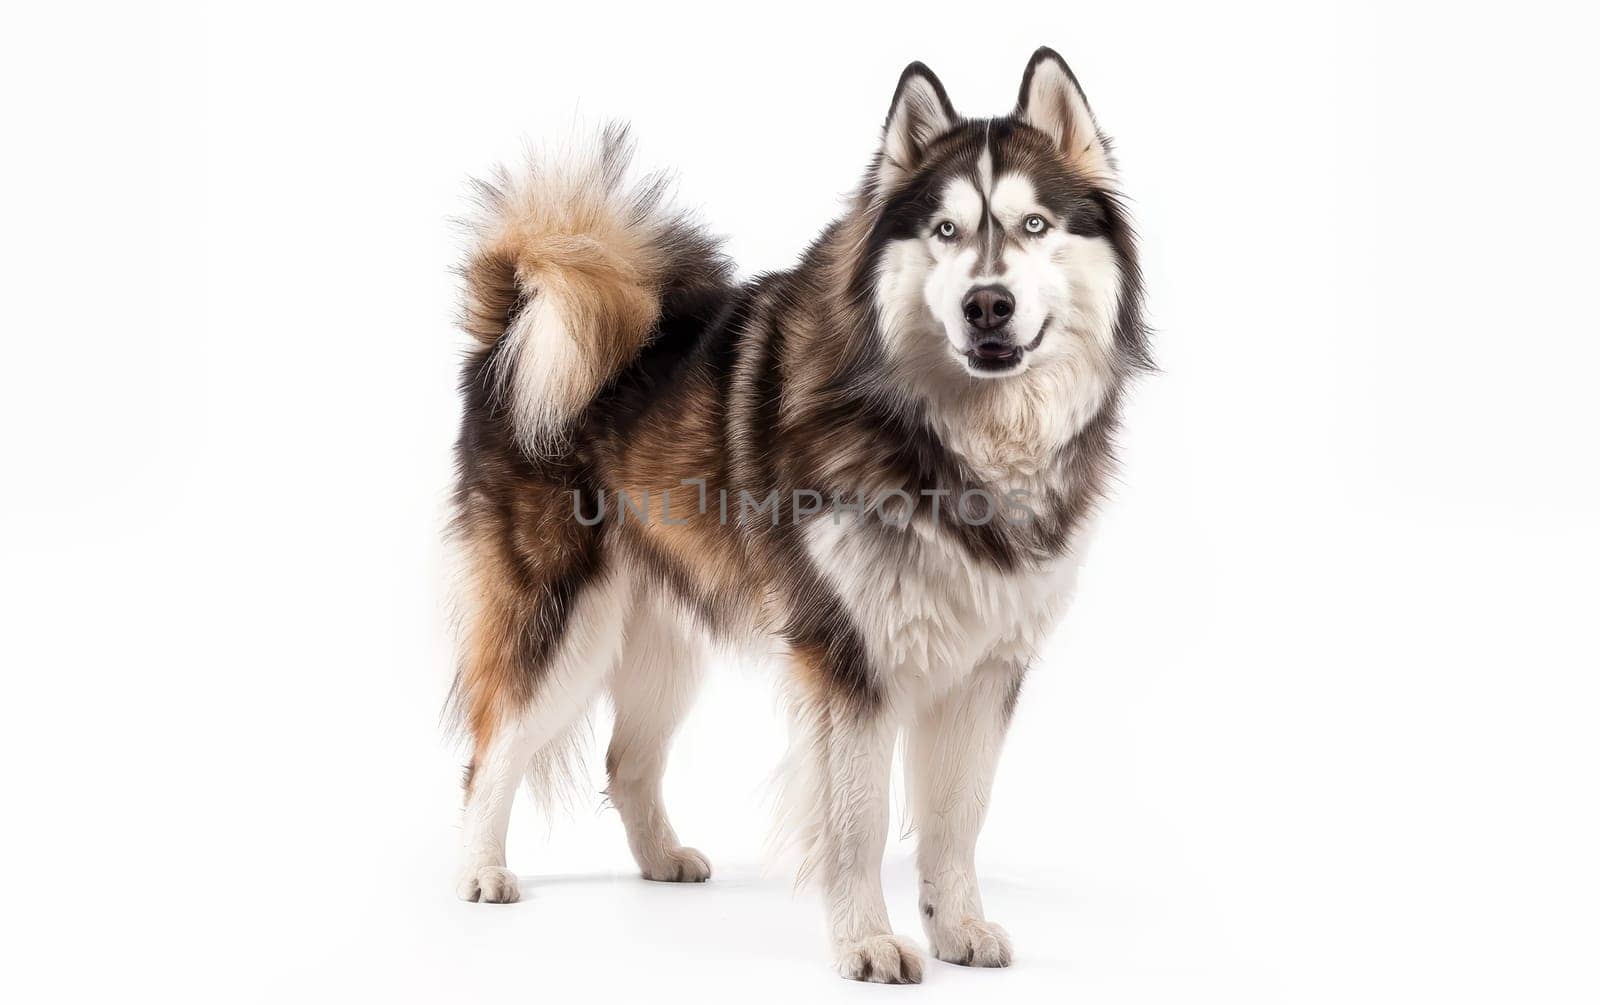 A proud Alaskan Malamute stands with a bold stance, its dense coat and alert expression reflecting the breed's resilience and dignity. This dog embodies the spirit of the great northern wilderness